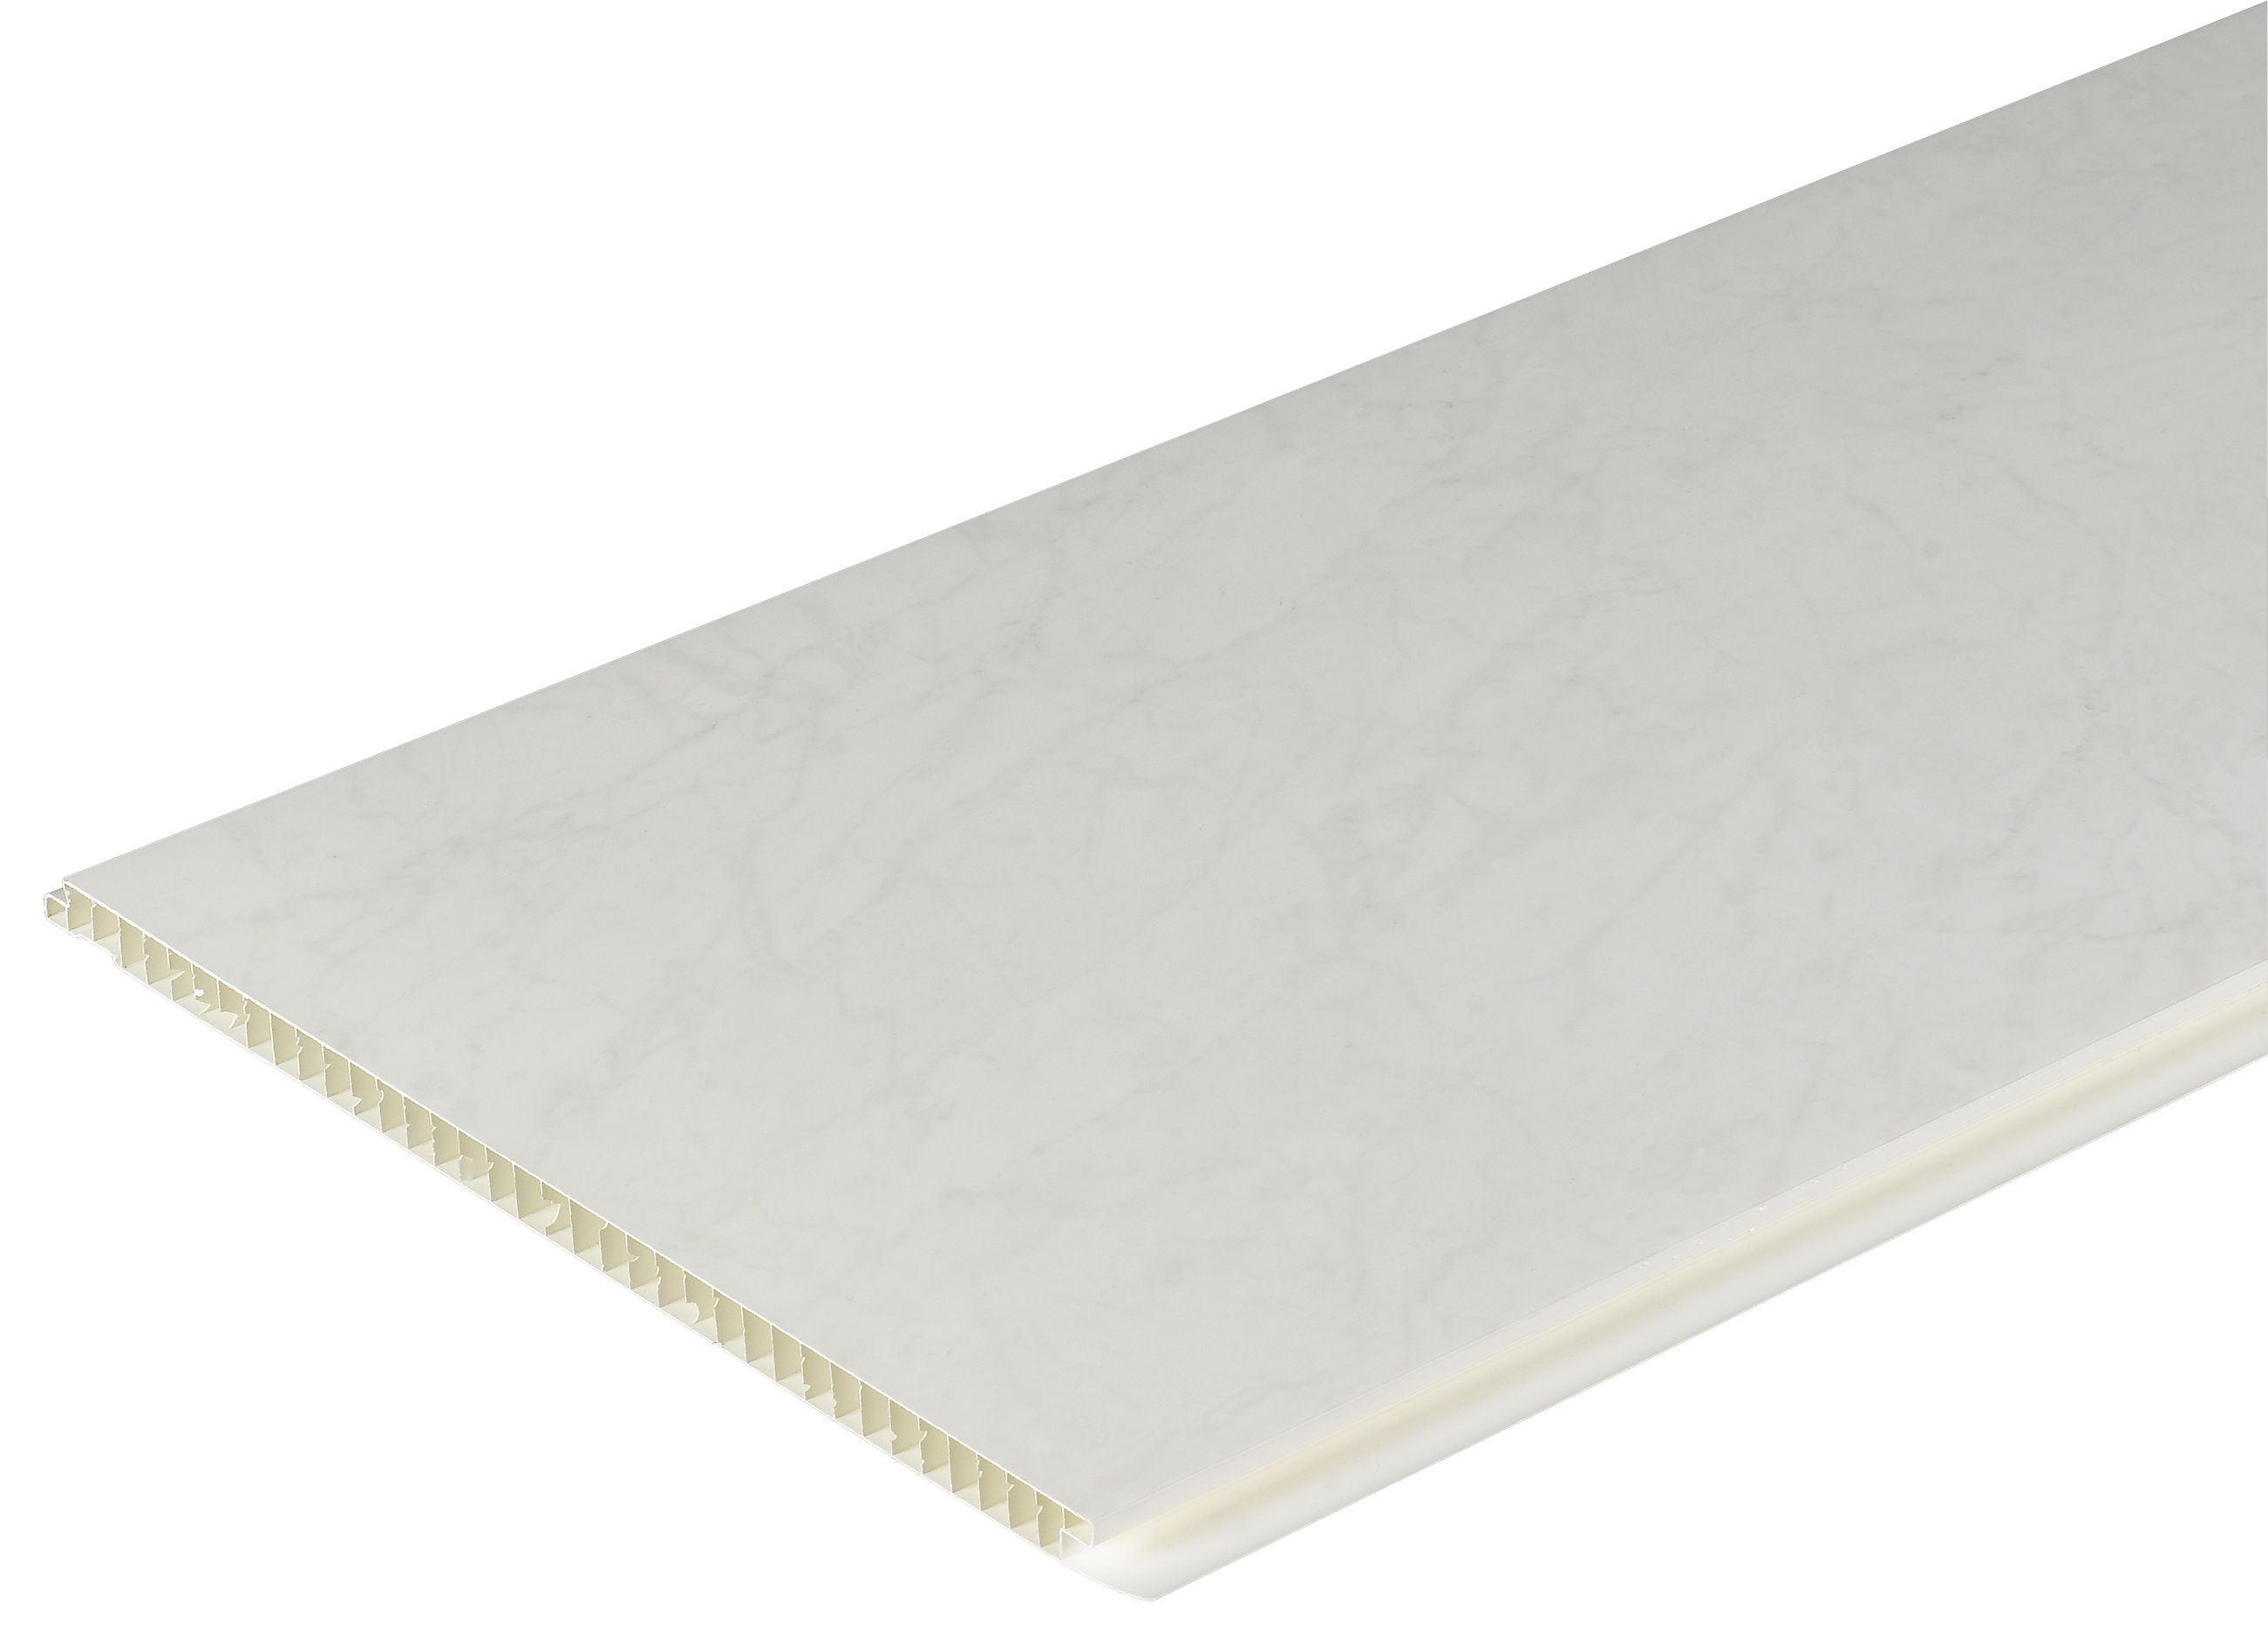 Image of Wickes PVCu Marble Effect Interior Cladding - 250mm x 2.5m Pack of 4